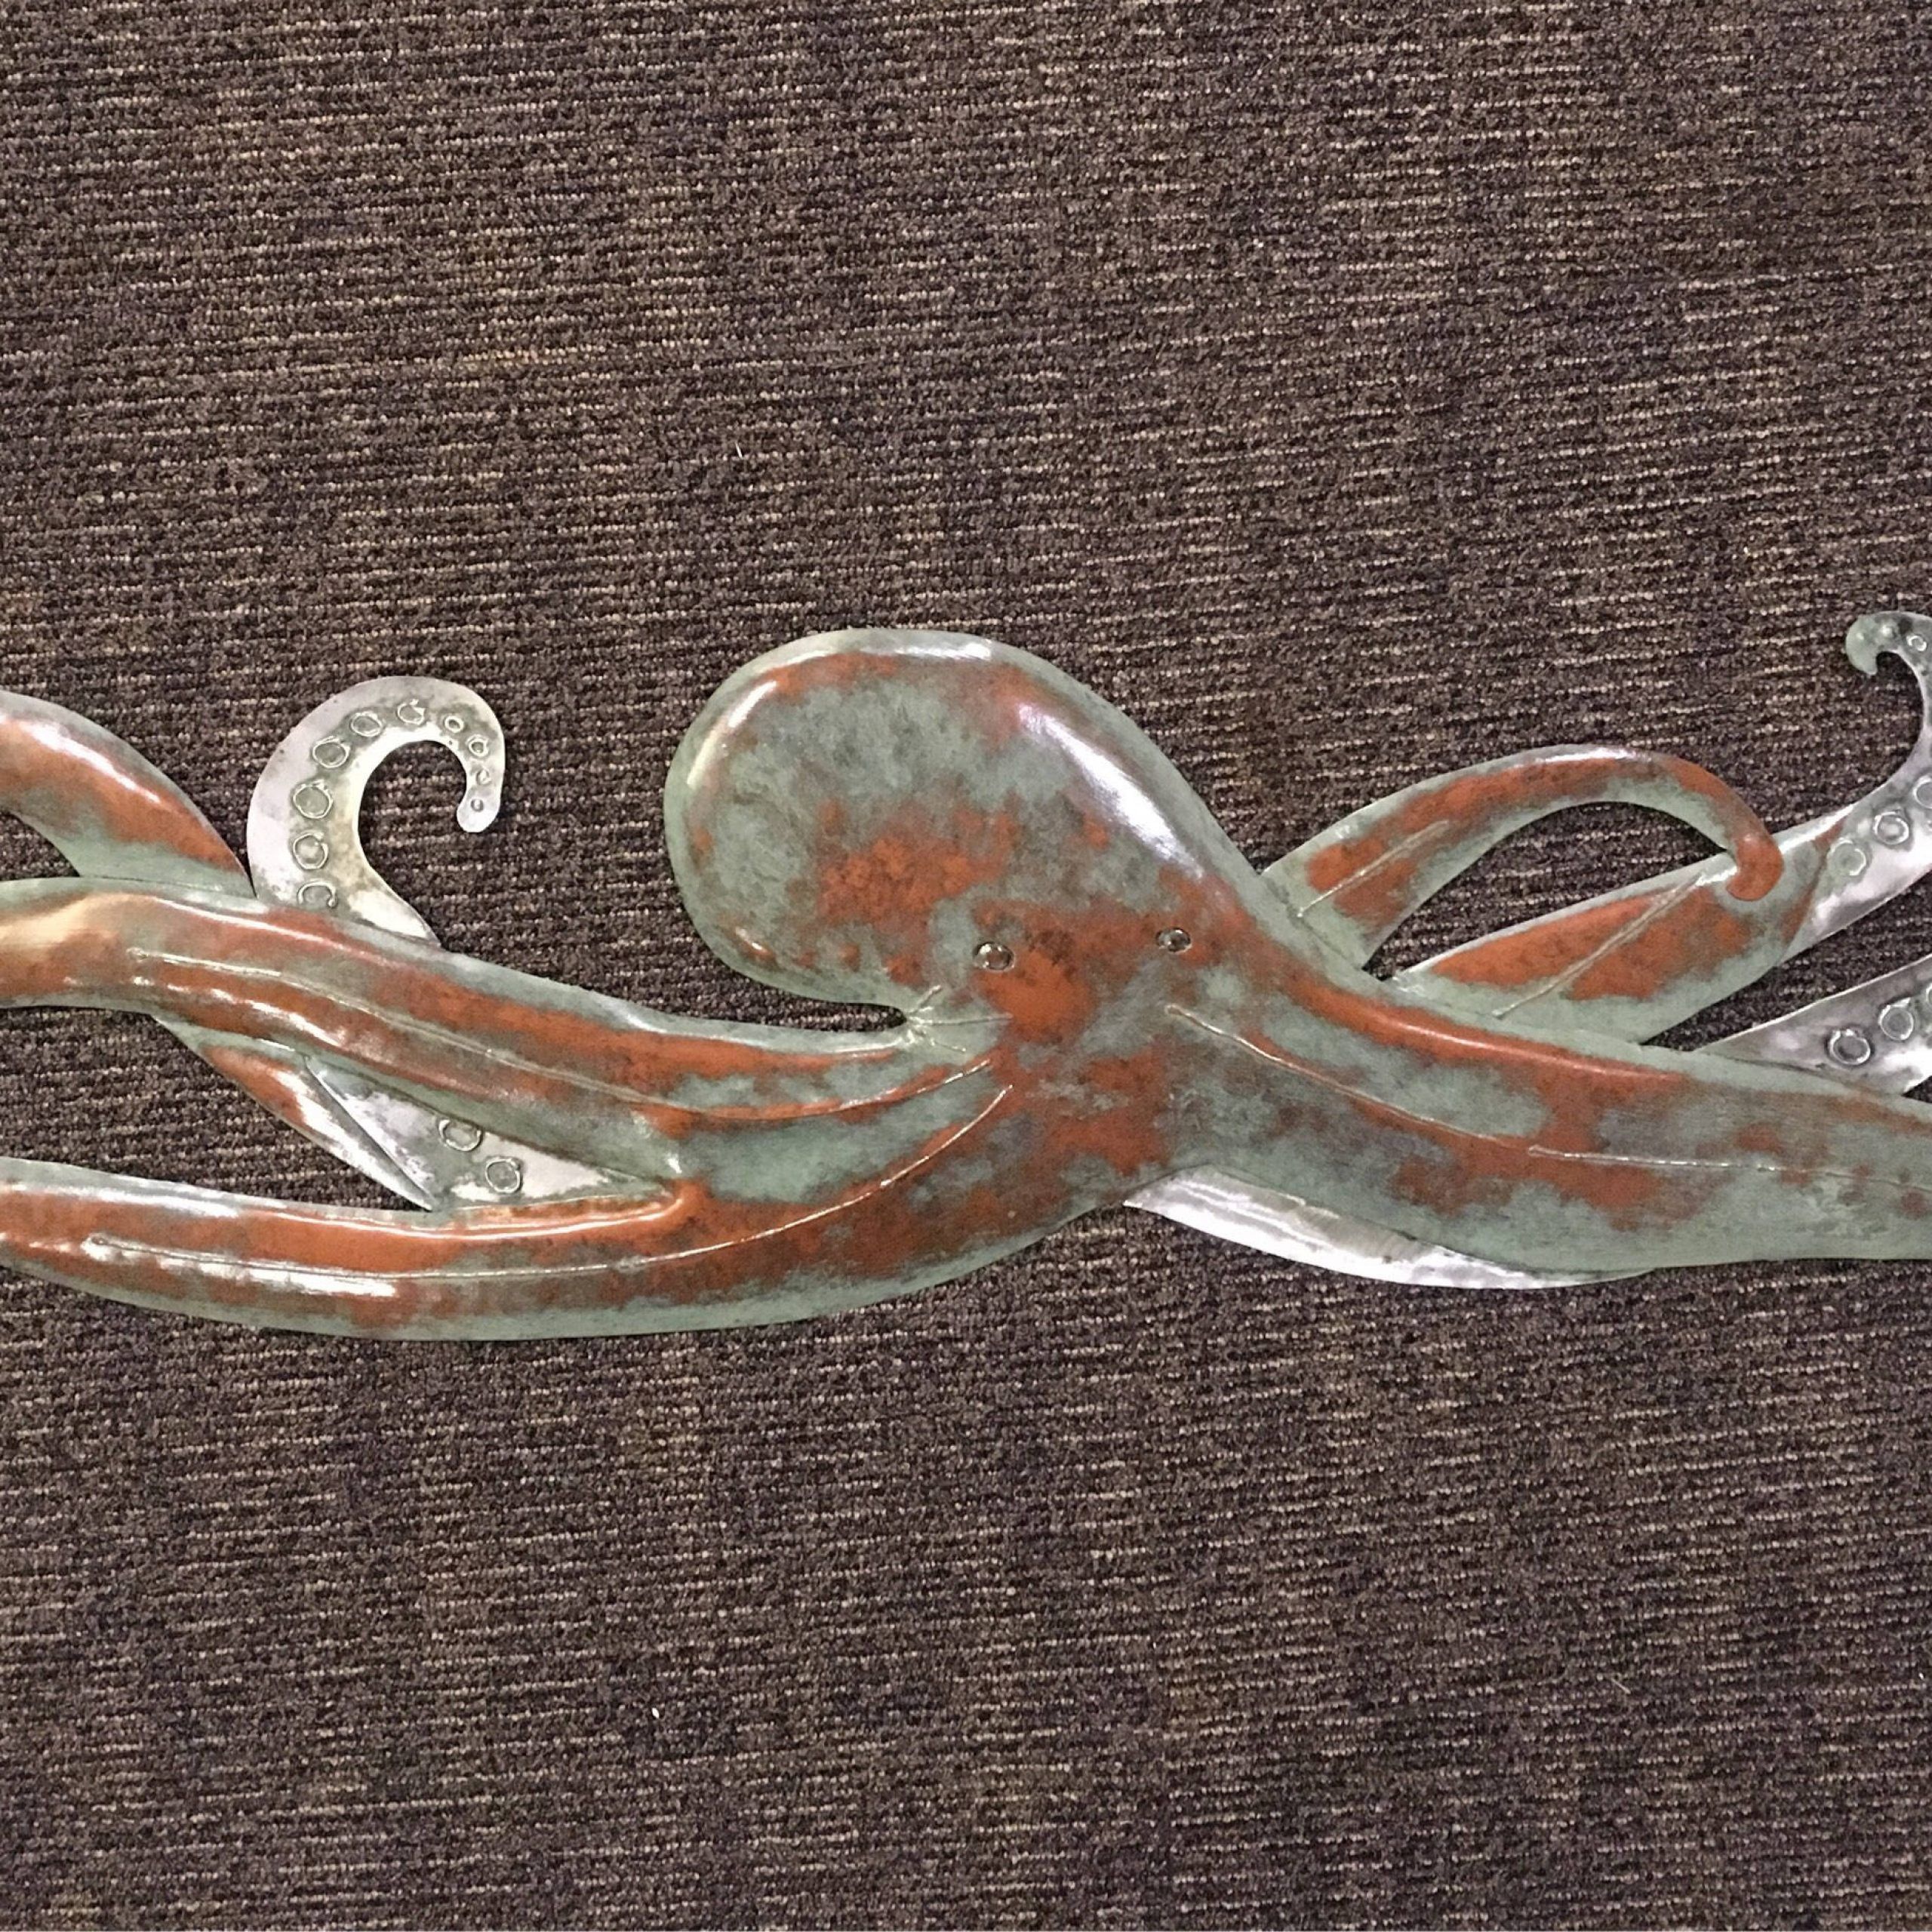 Octopus Metal 48in Handmade Wall Art Sculpture Free Shipping In The Us Intended For 2017 Octopus Metal Wall Sculptures (View 13 of 20)